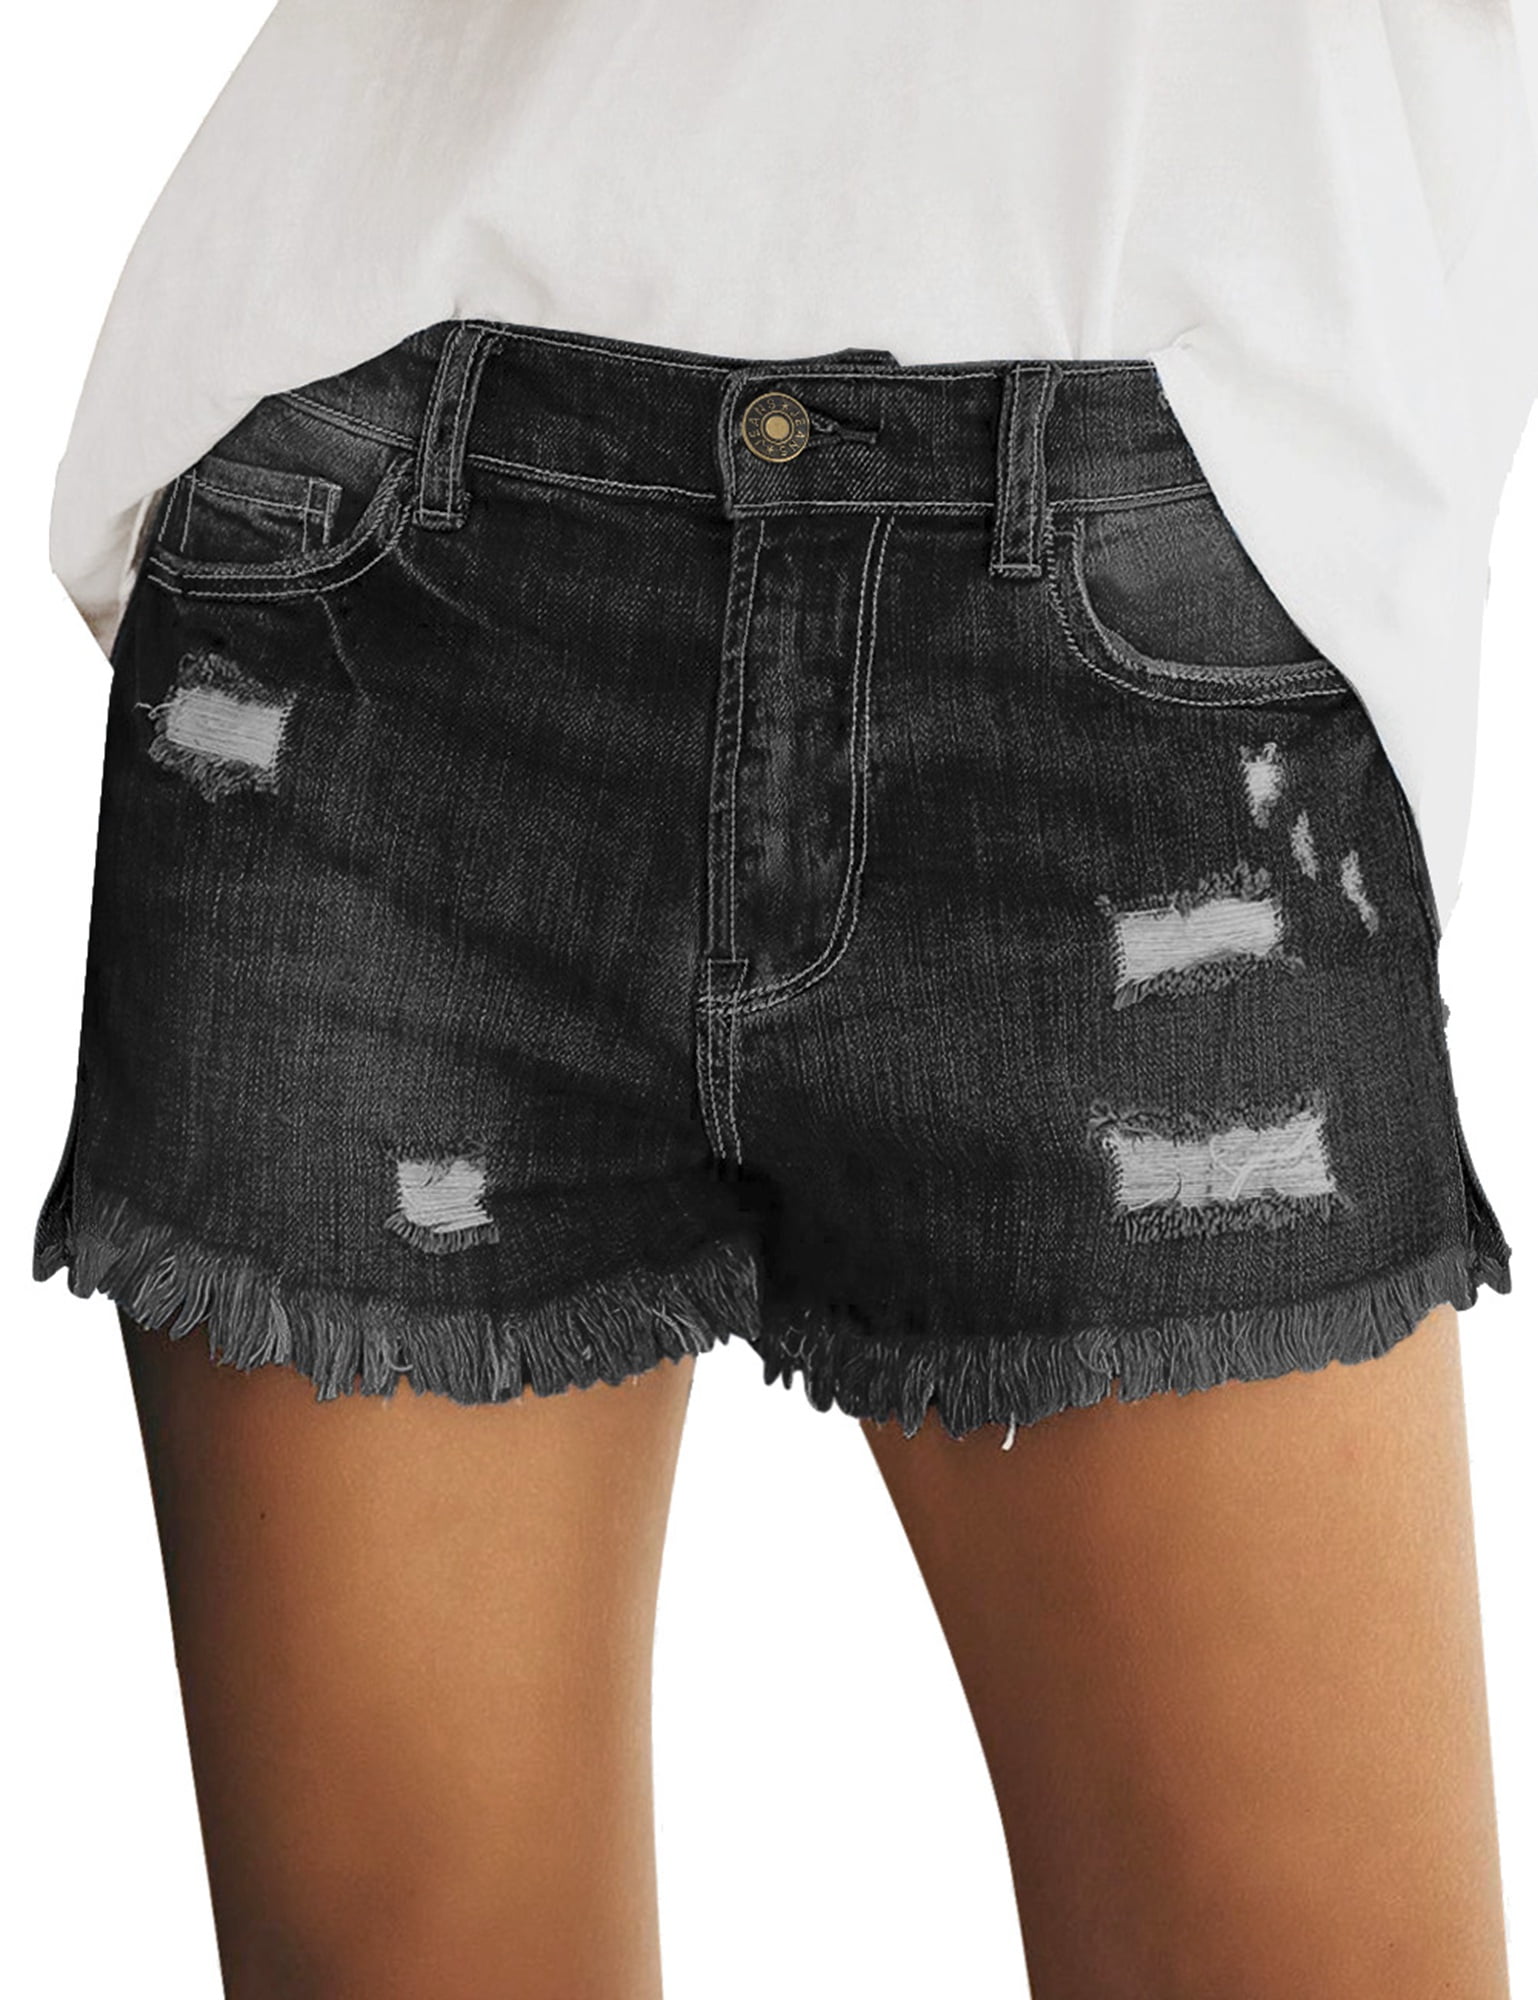 luvamia Casual Destroyed Denim Shorts for Women Mid Rise Jean Shorts ...